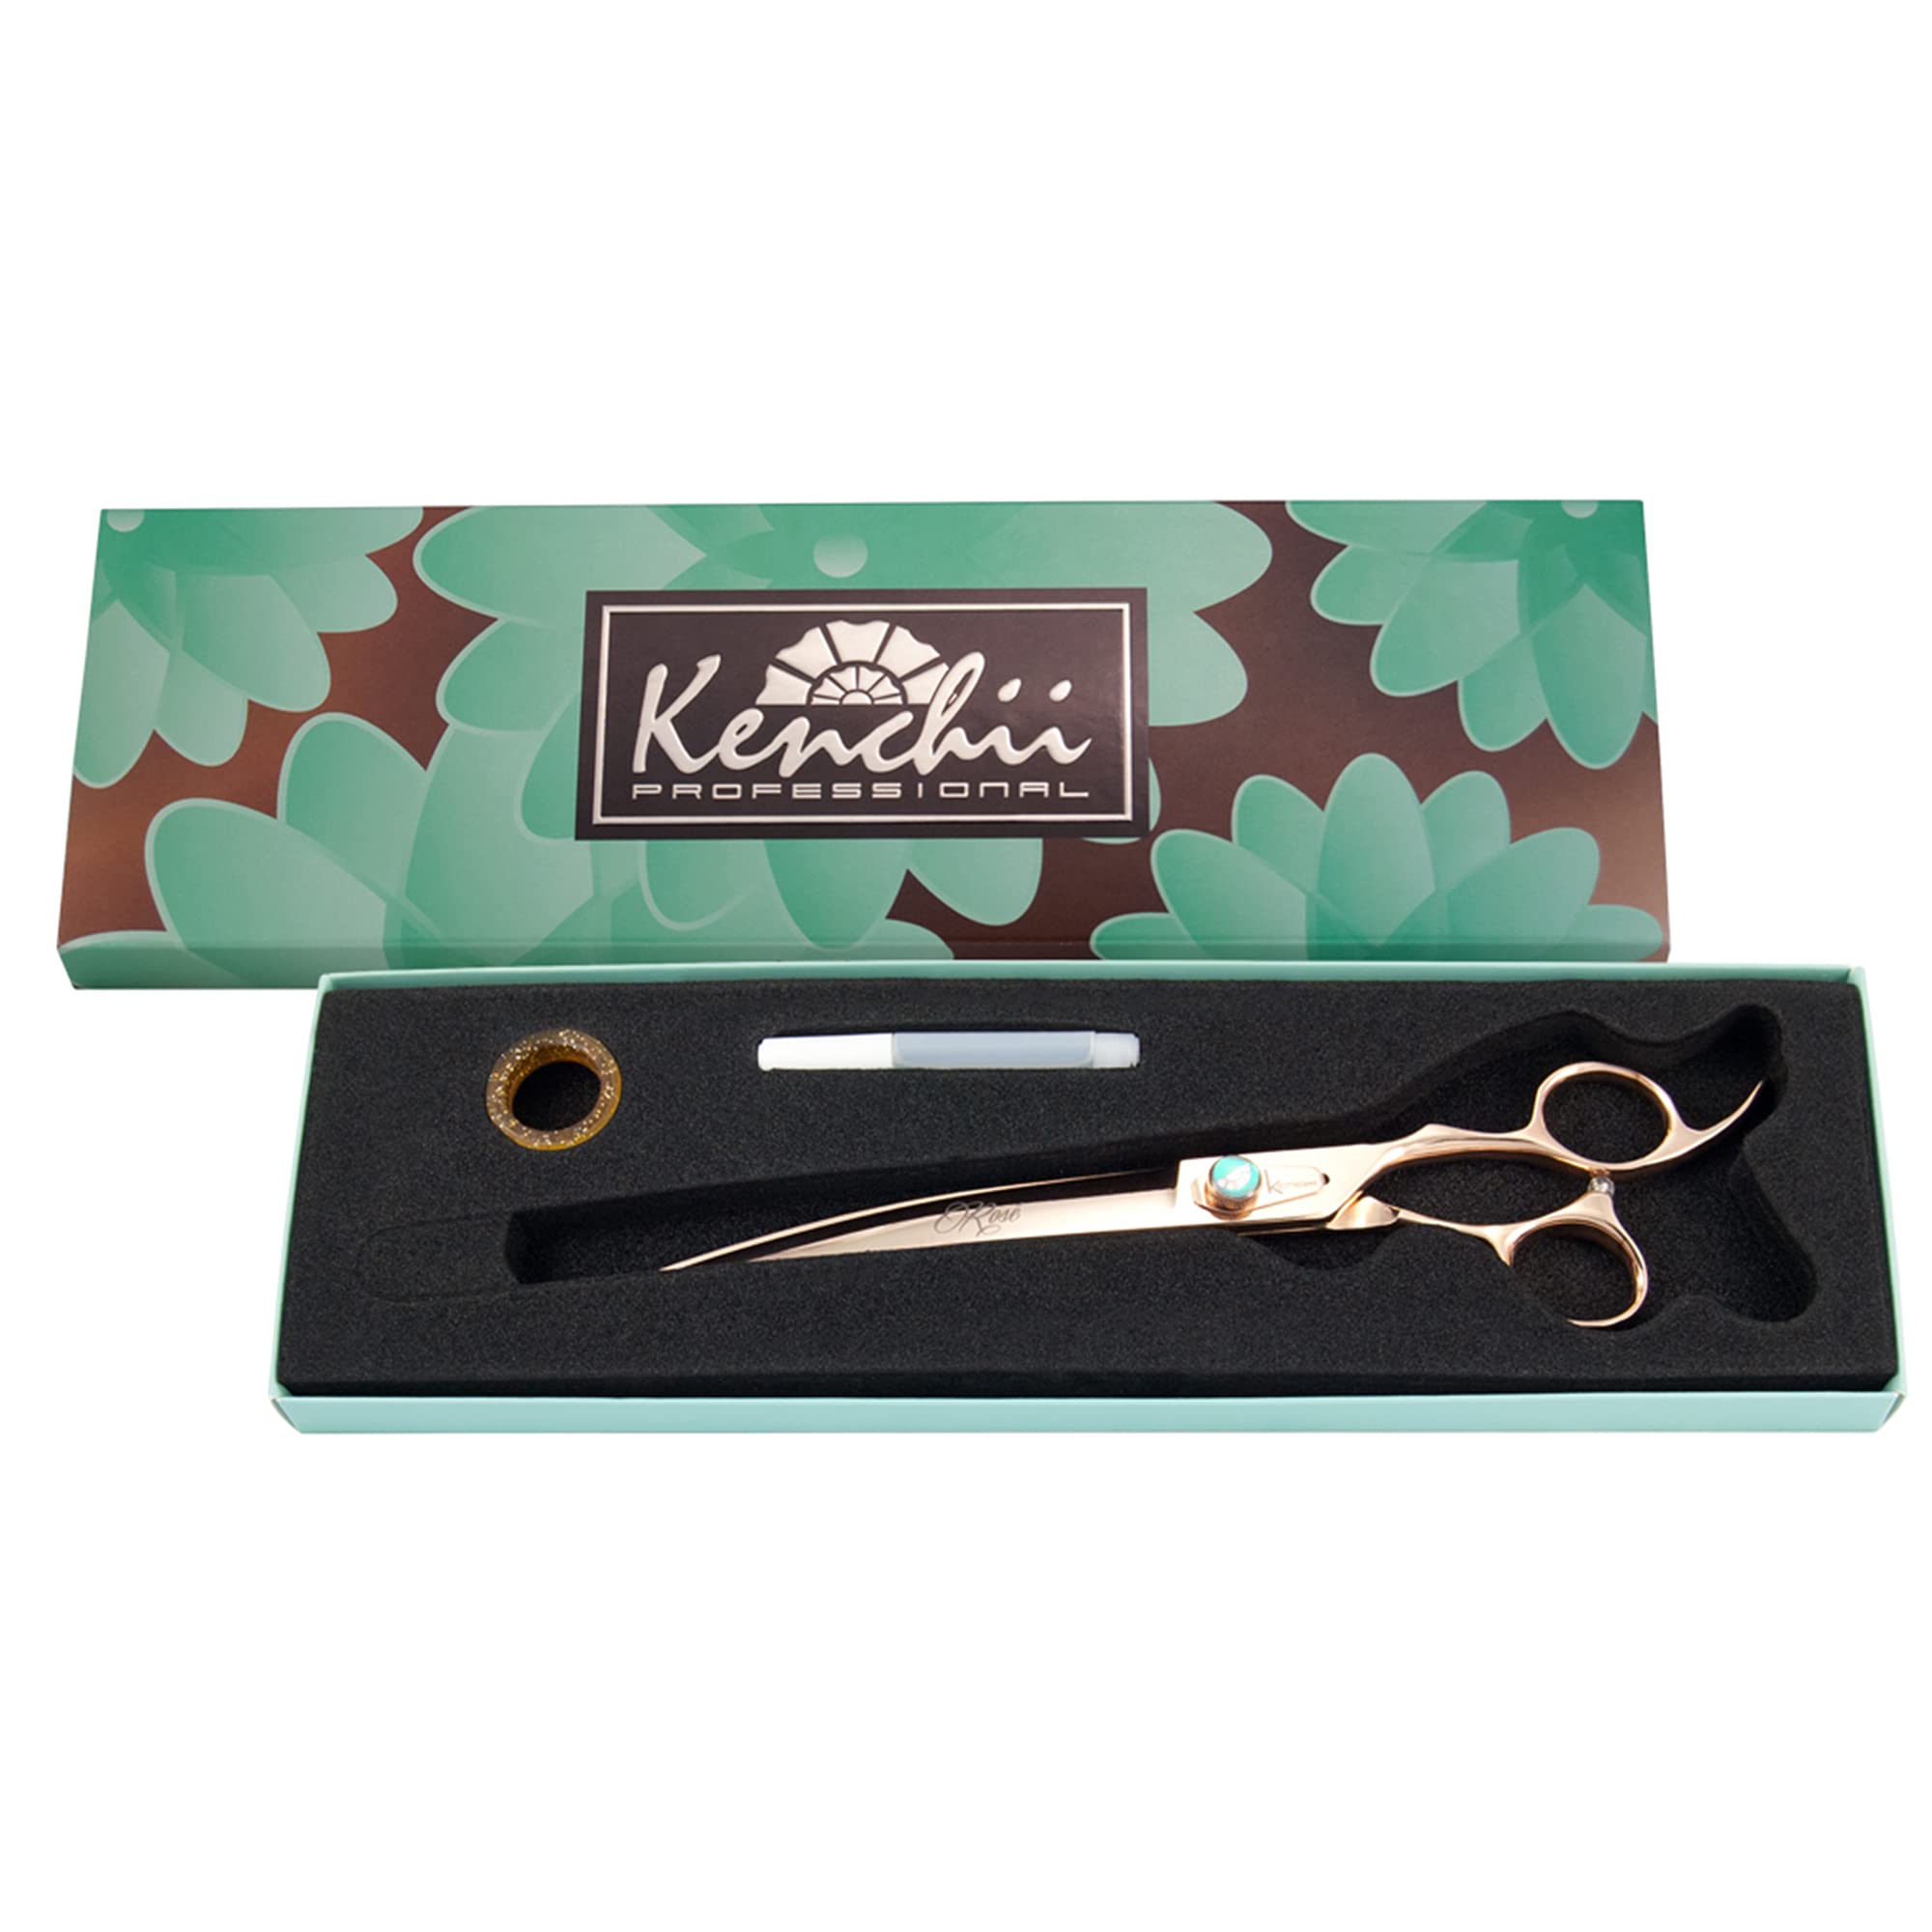 Kenchii Dog grooming Scissors 8 Inch Shears curved Scissors for Dog grooming Rose collection Dog Shears Pet grooming Accessories